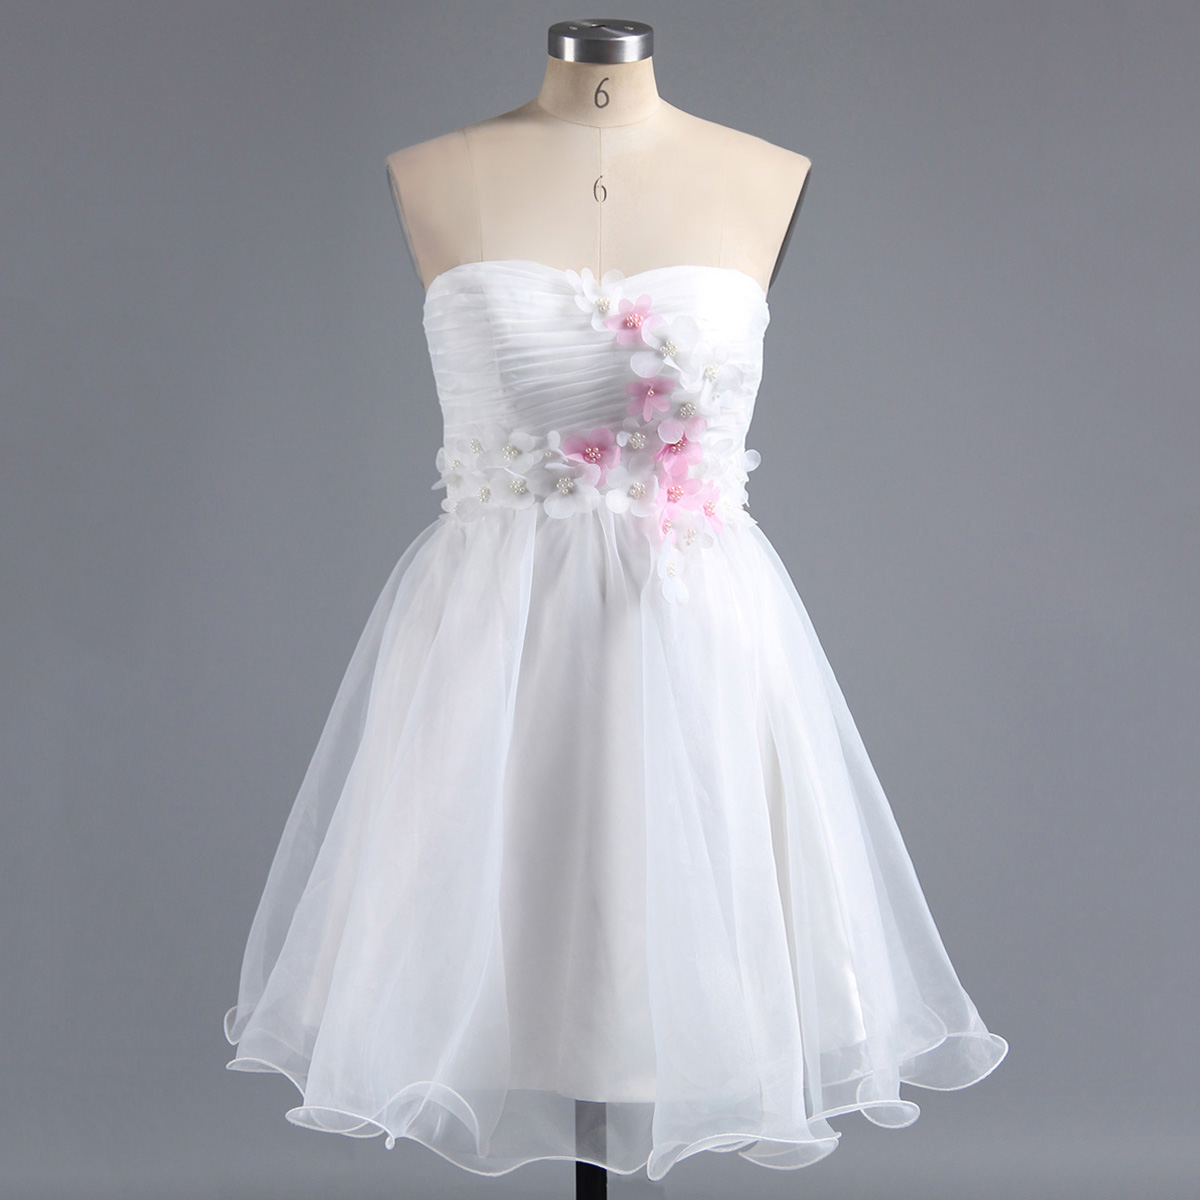 White Sweetheart Homecoming Dress With 3-d Appliques, Floral Short Homecoming Dress, Sweet Organza Homecoming Dress With A Ribbon